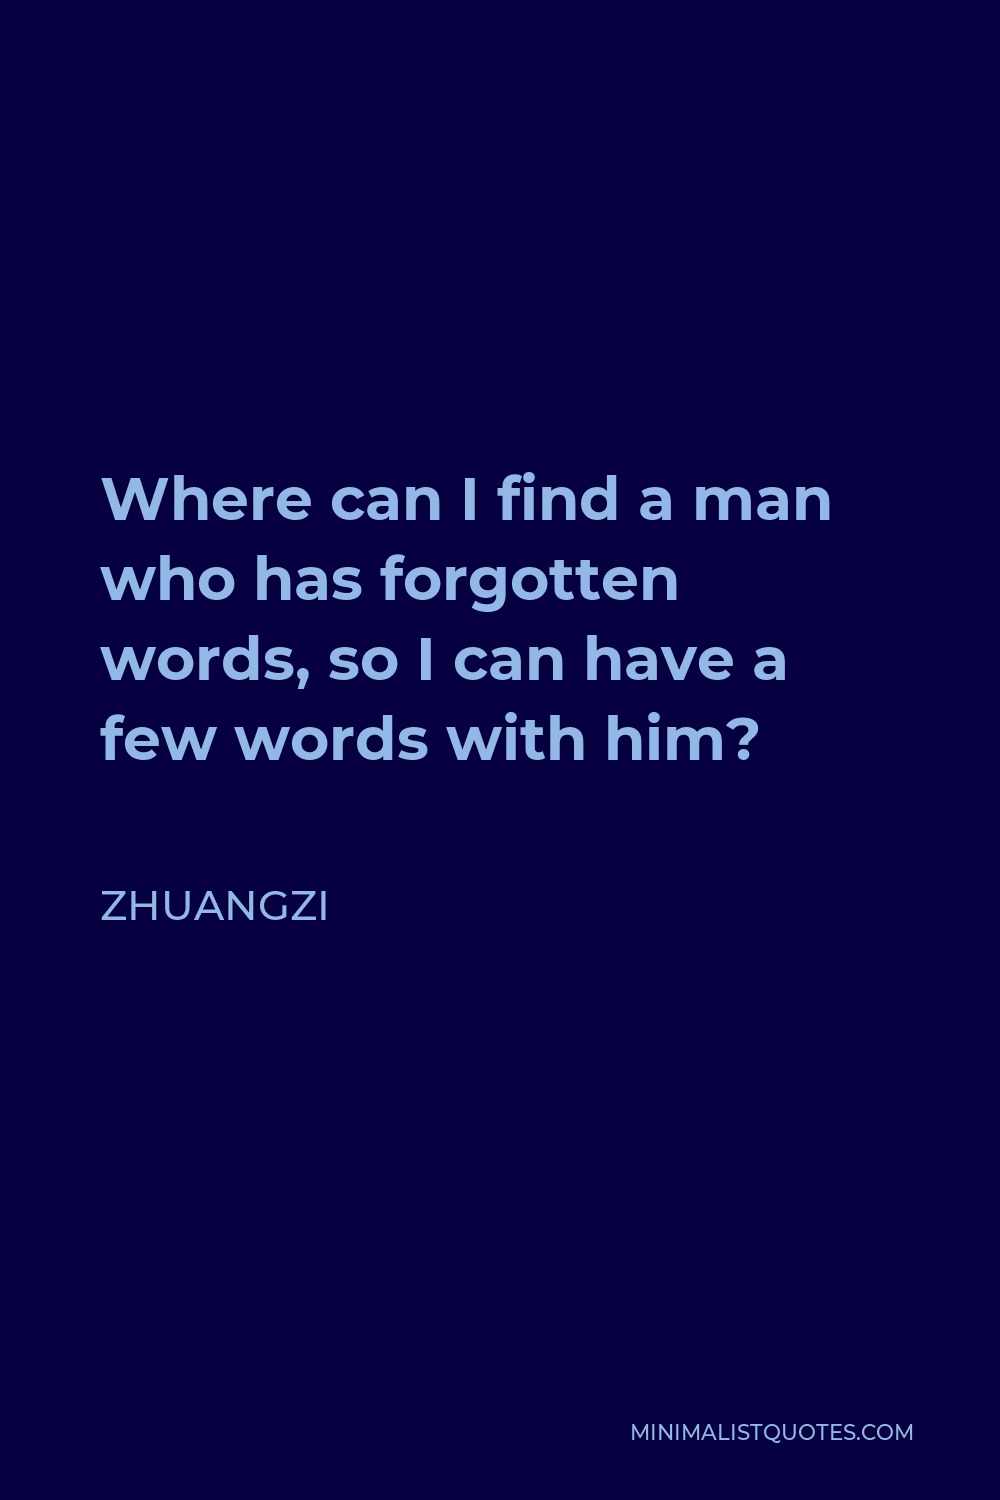 Zhuangzi Quote - Where can I find a man who has forgotten words, so I can have a few words with him?